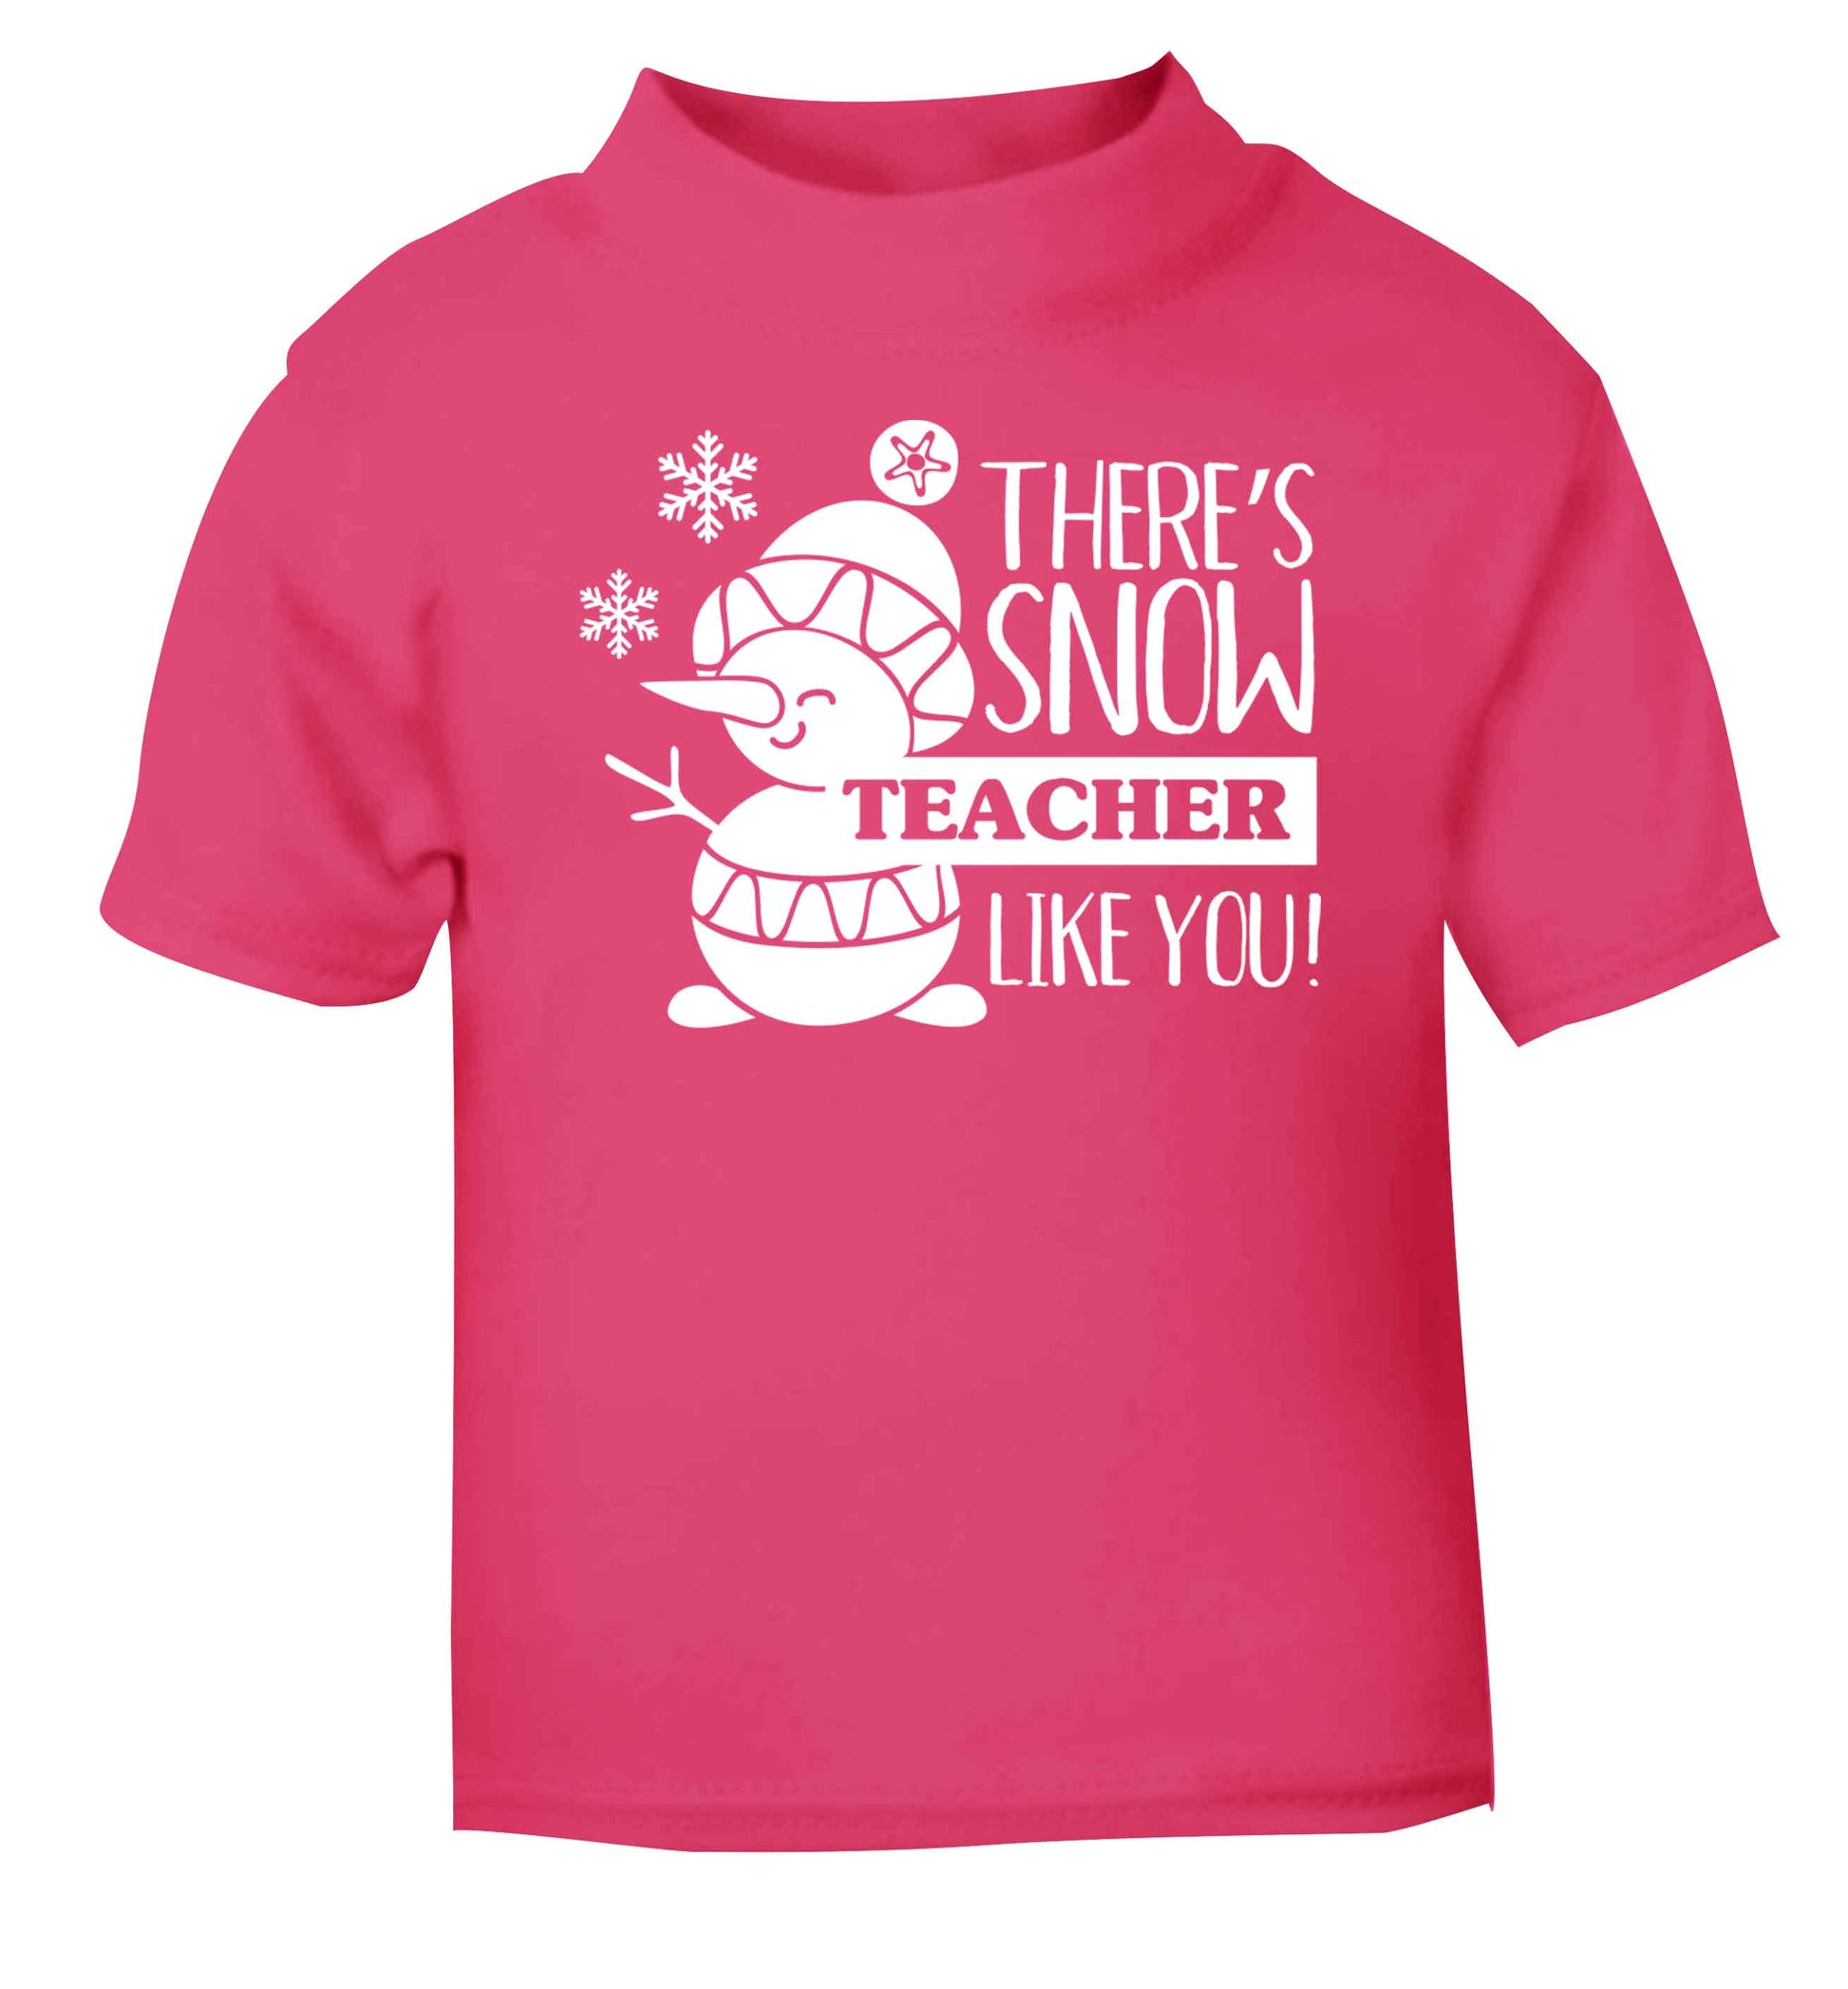 There's snow teacher like you pink baby toddler Tshirt 2 Years